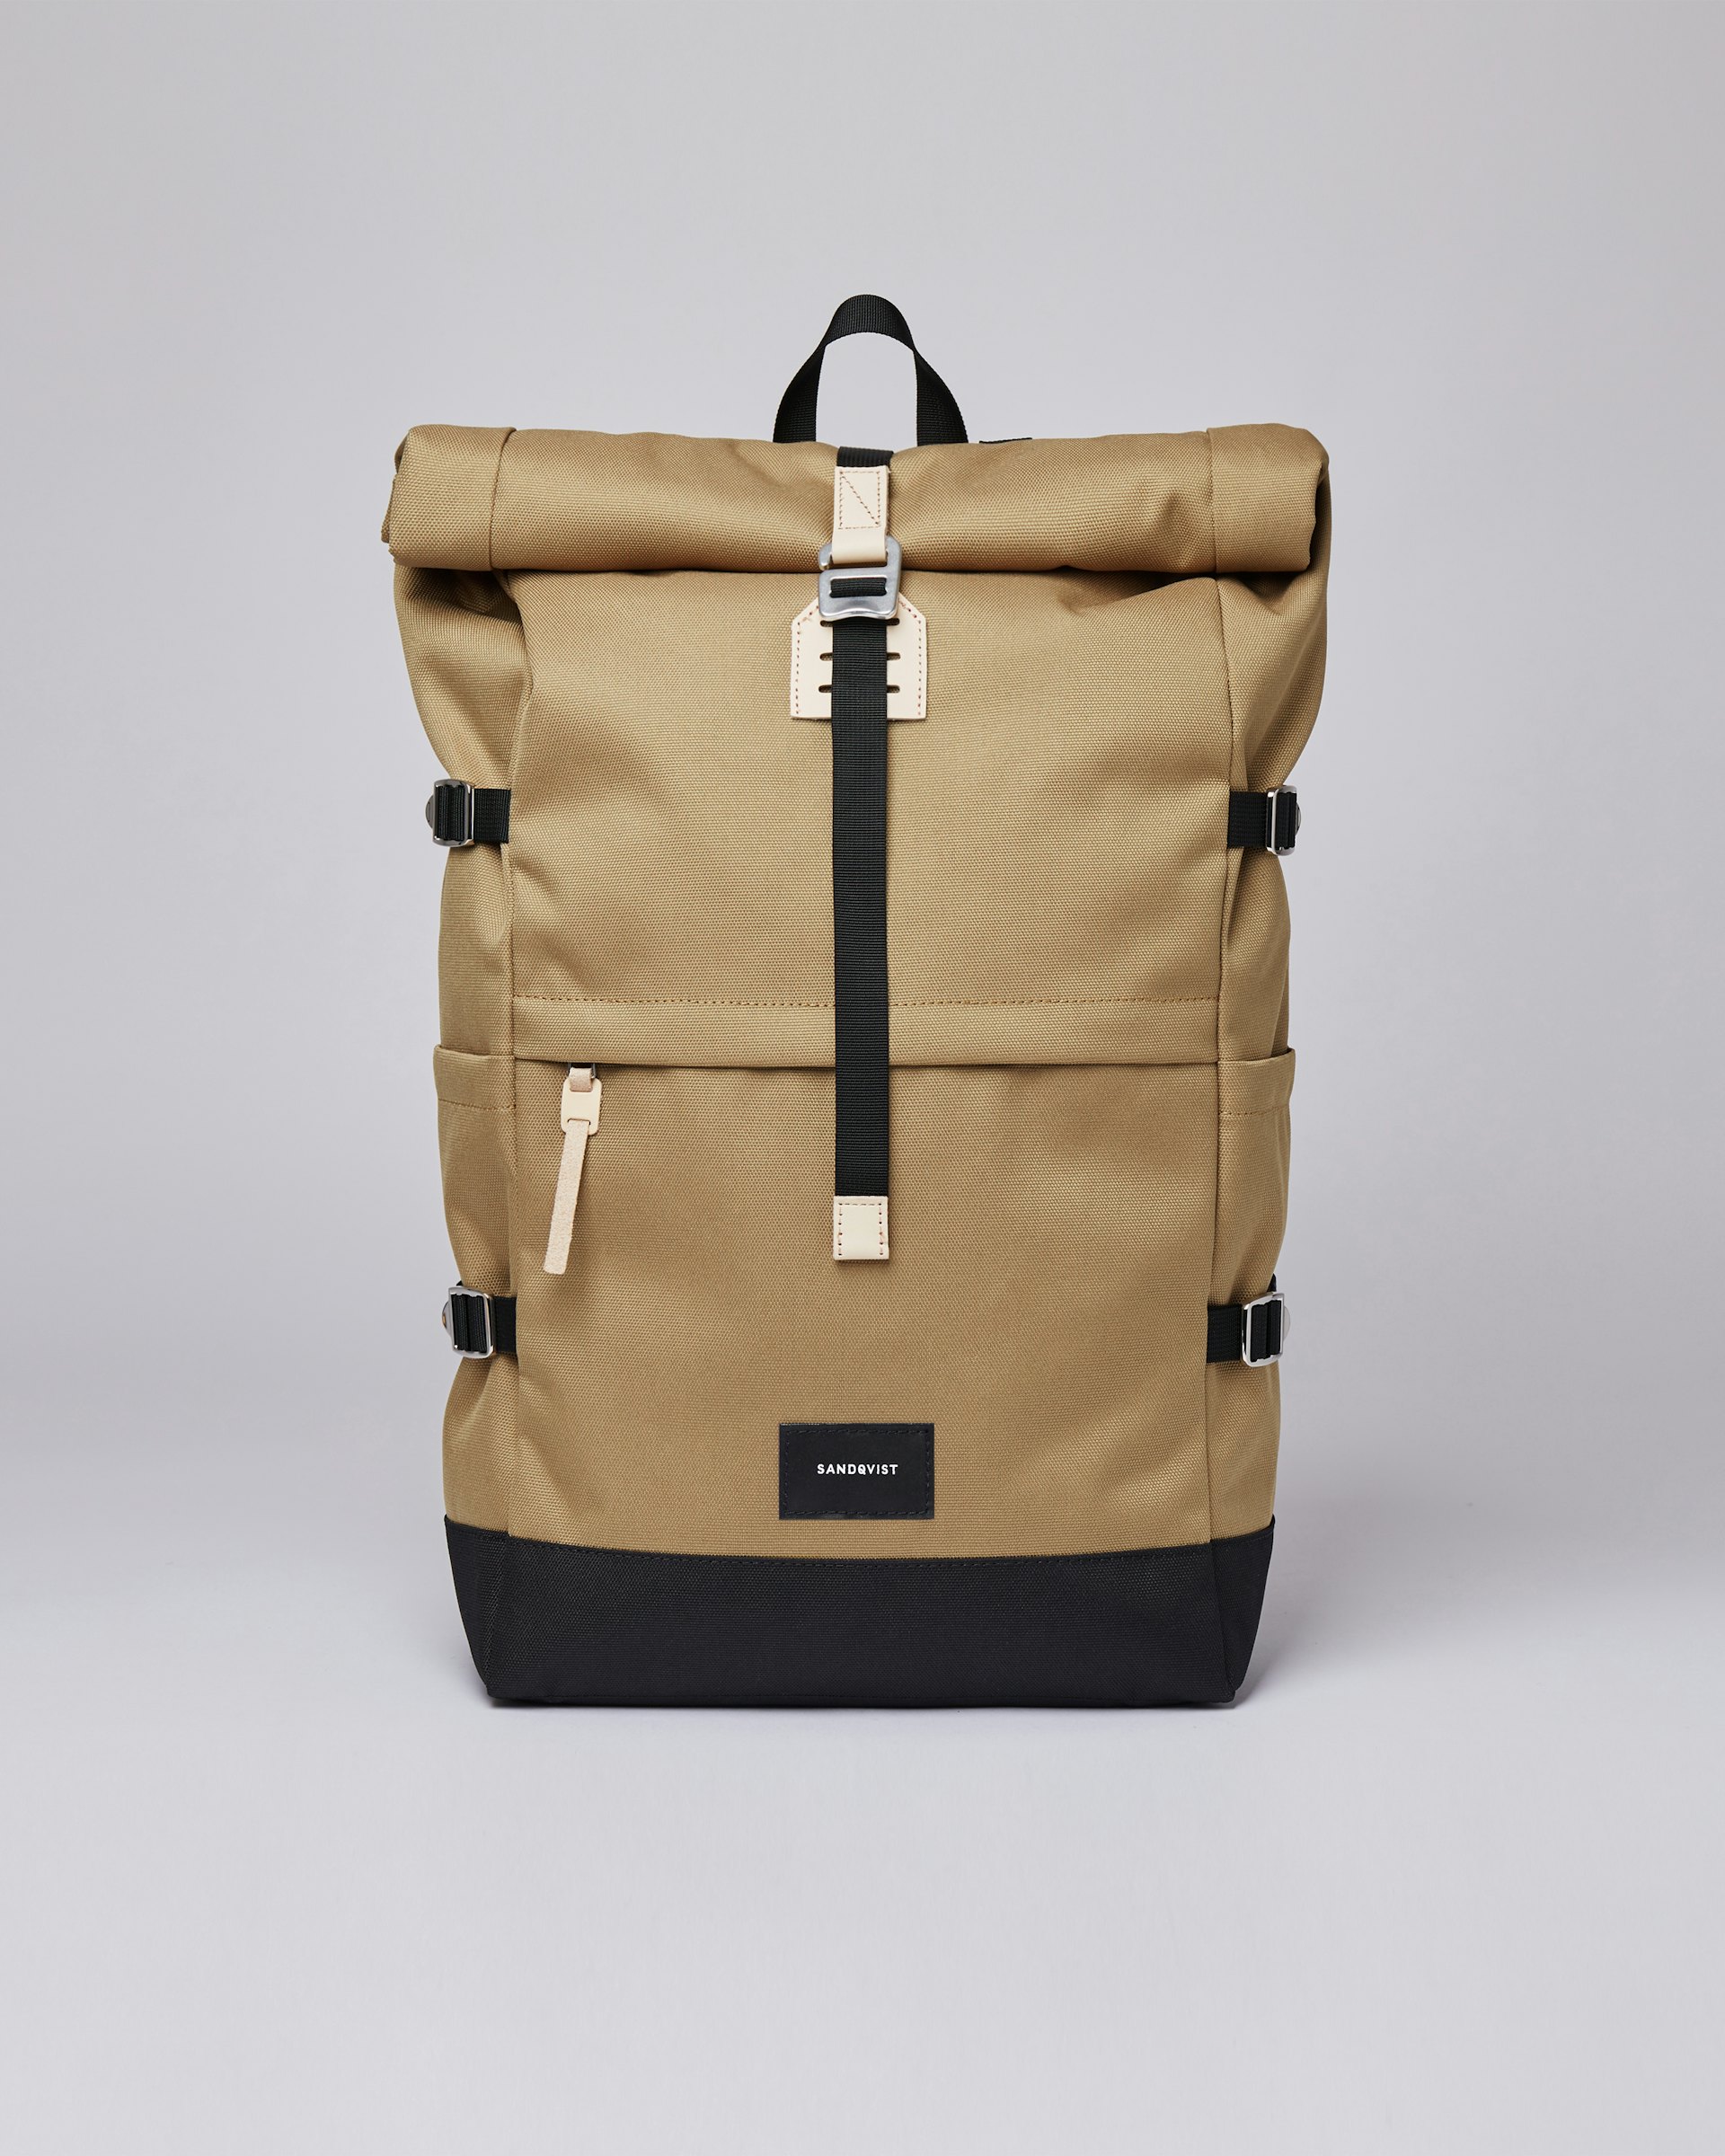 Bernt belongs to the category Backpacks and is in color bronze